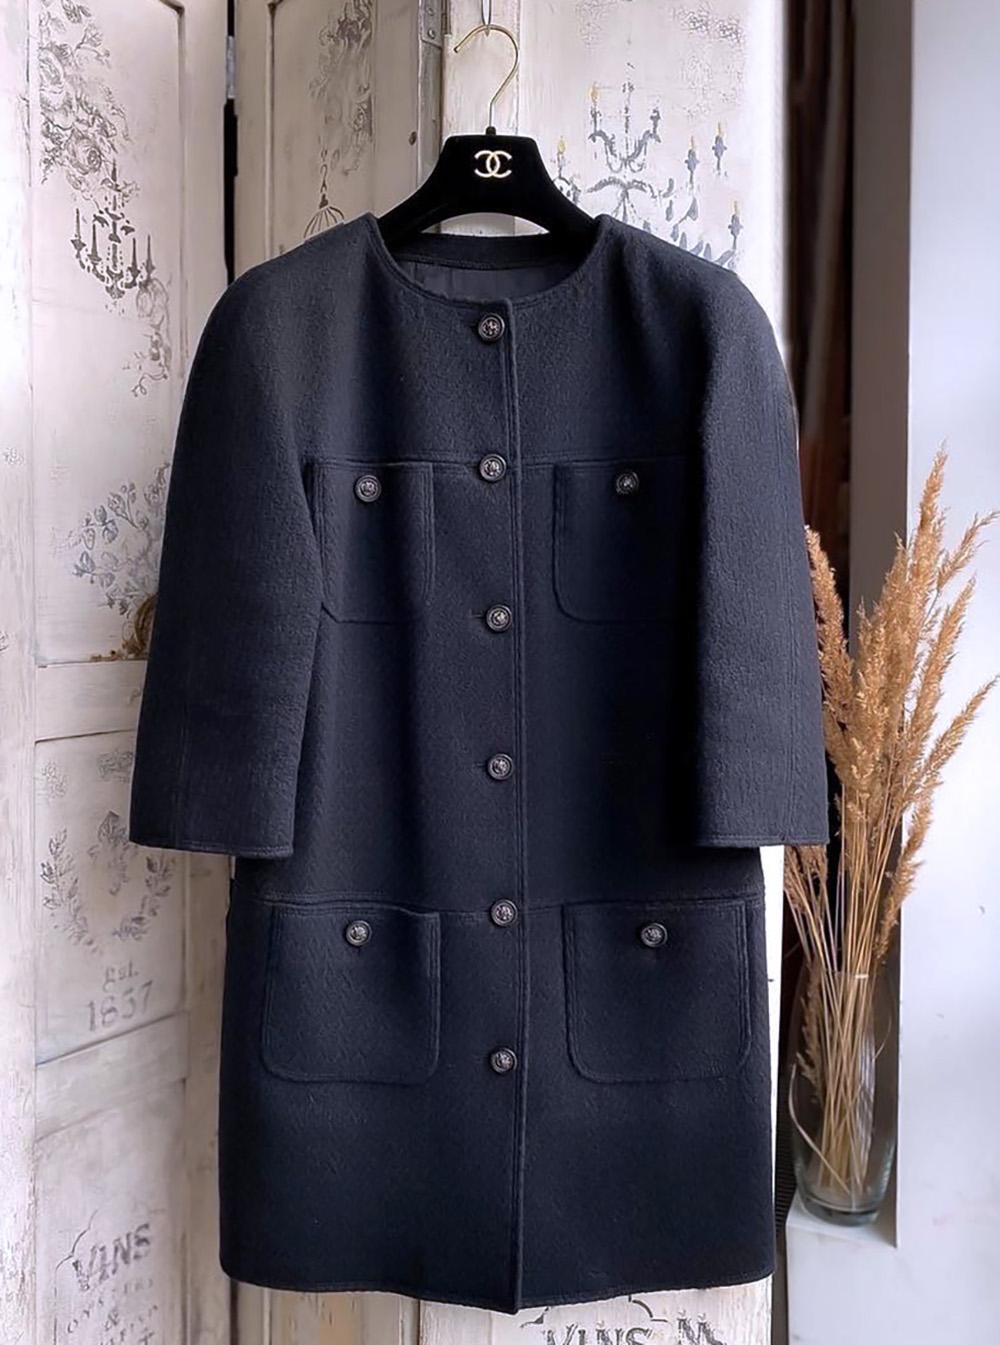 Chanel New CC Lionhead Buttons Tweed Coat In New Condition For Sale In Dubai, AE